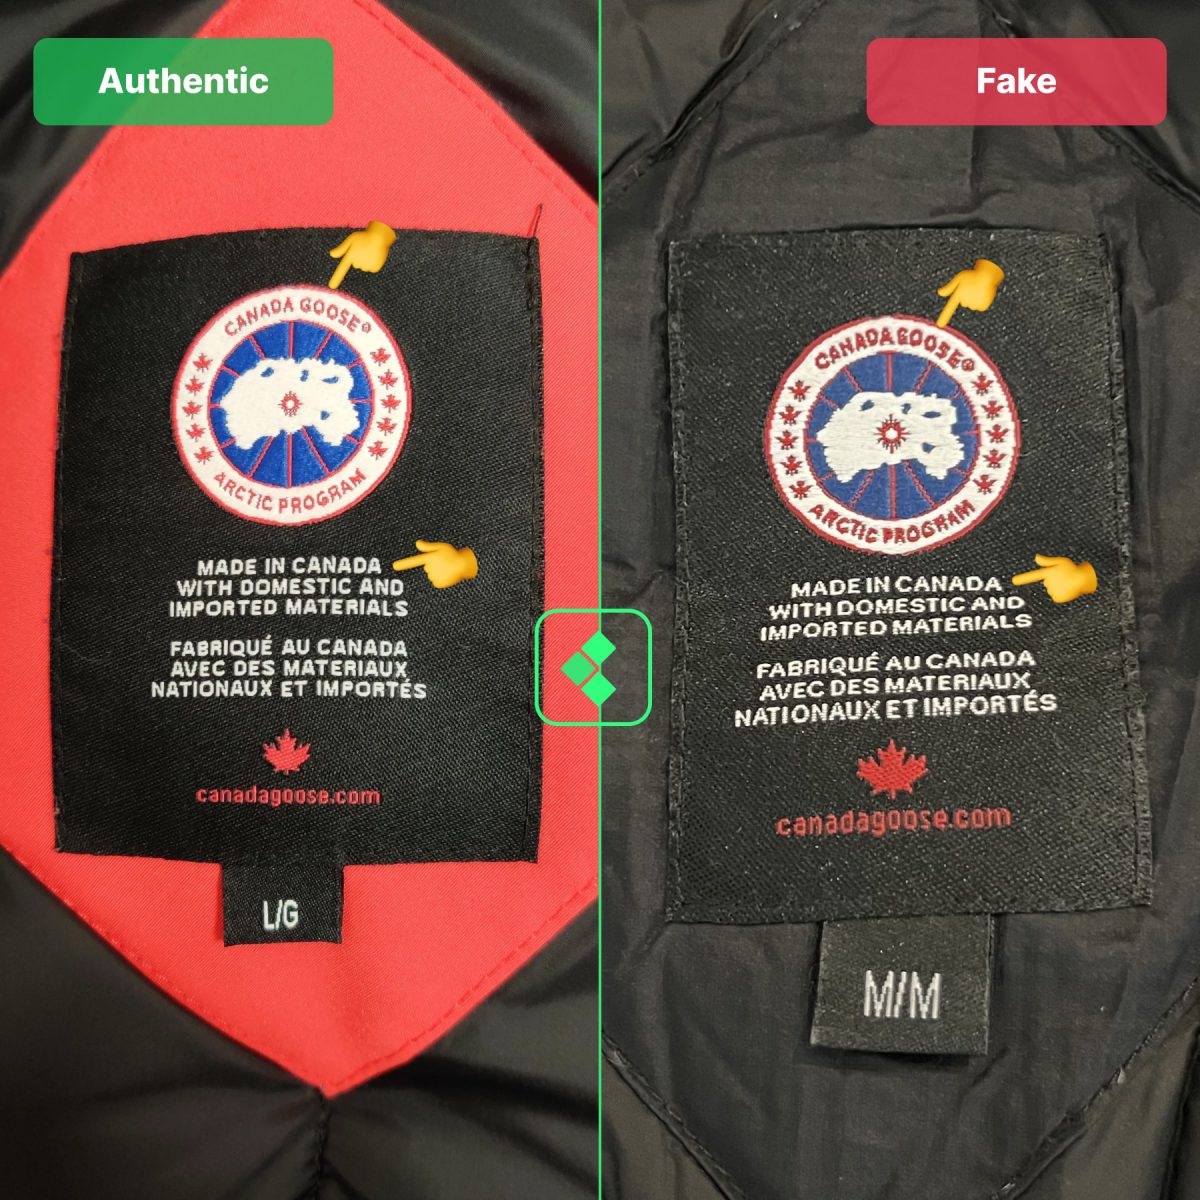 Fake vs Real Canada Goose: Neck Tags